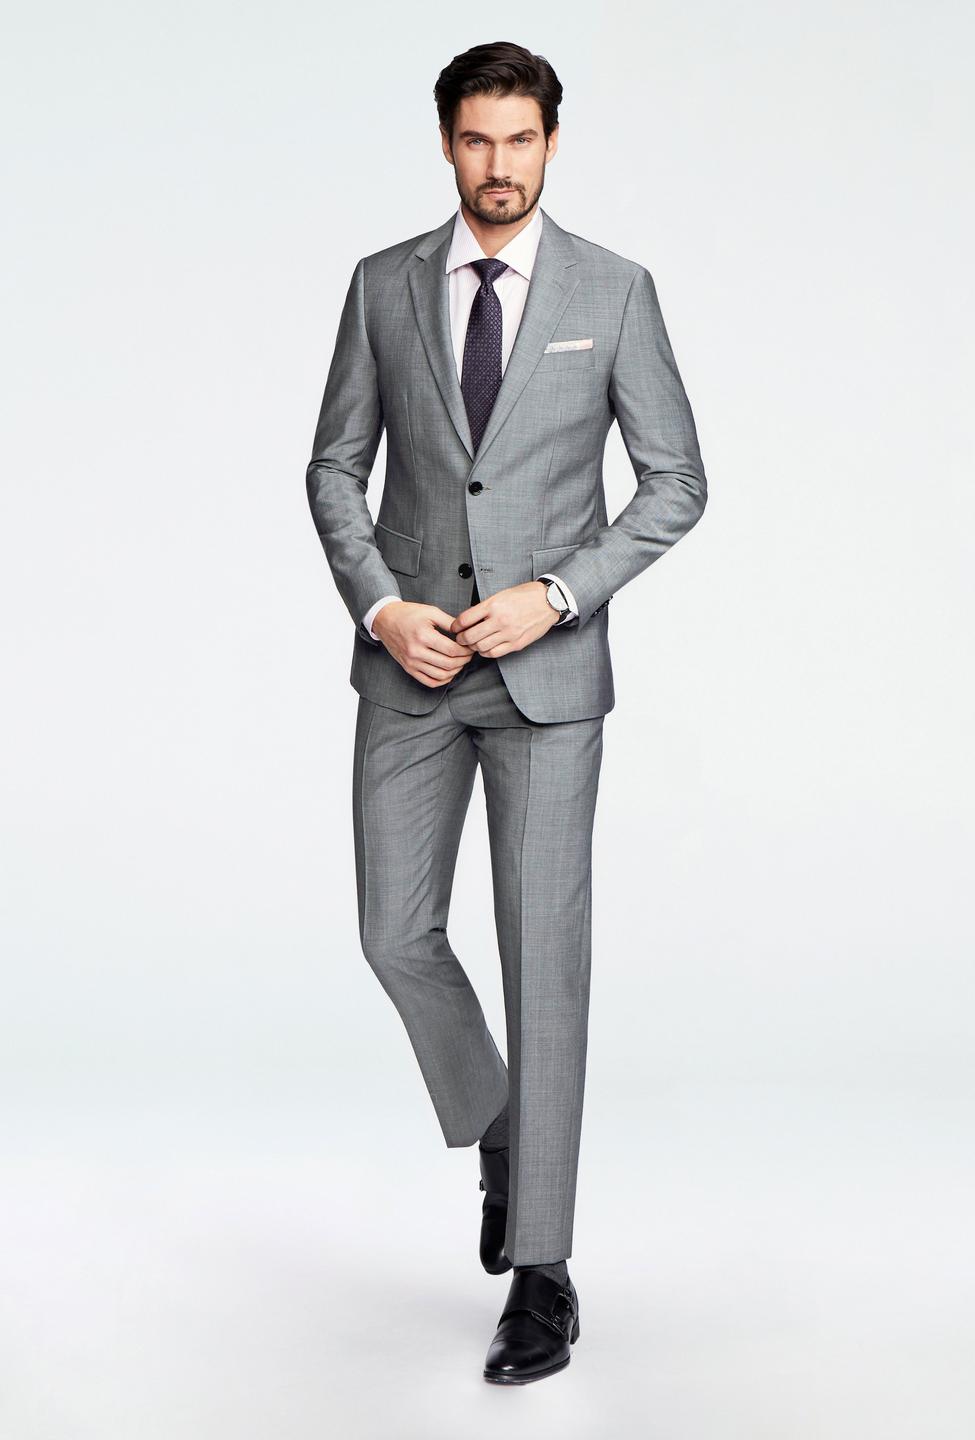 Gray suit - Hamilton Solid Design from Luxury Indochino Collection